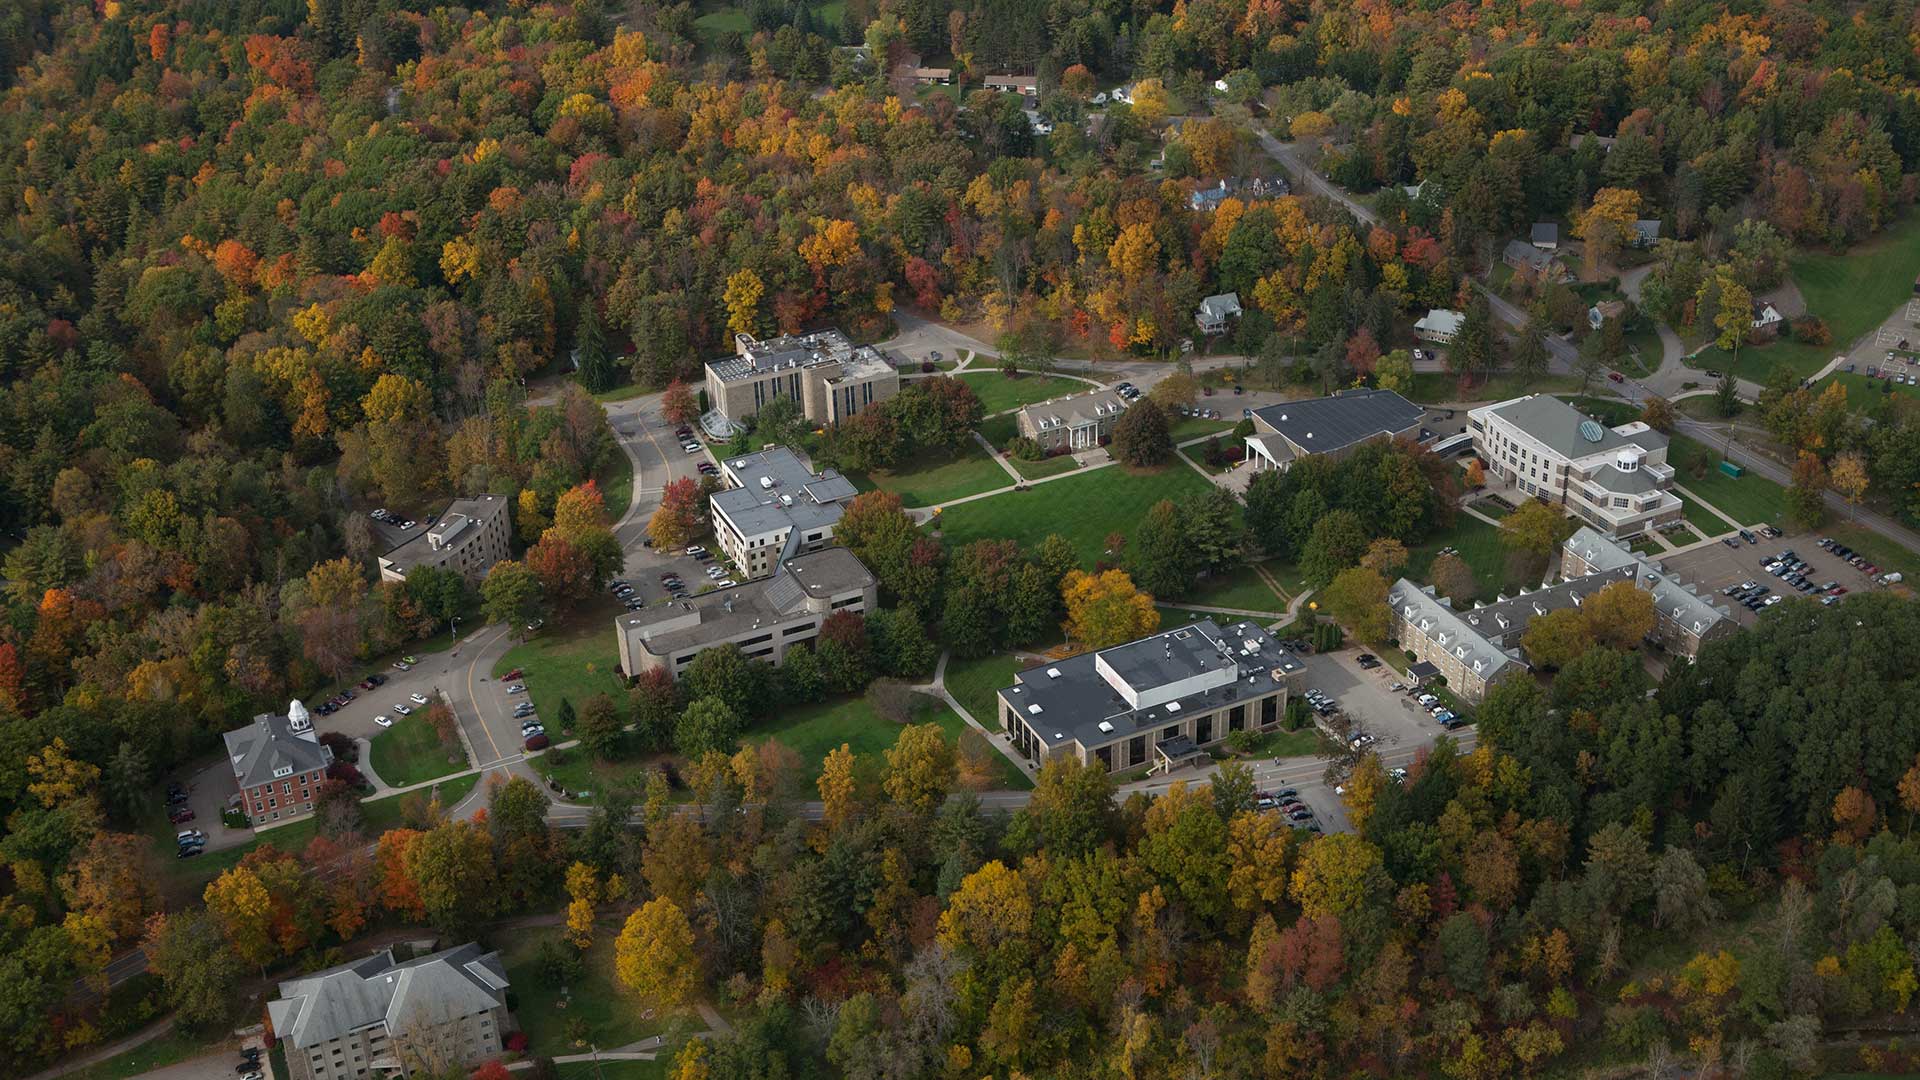 Aerial view of Houghton University campus in the fall.